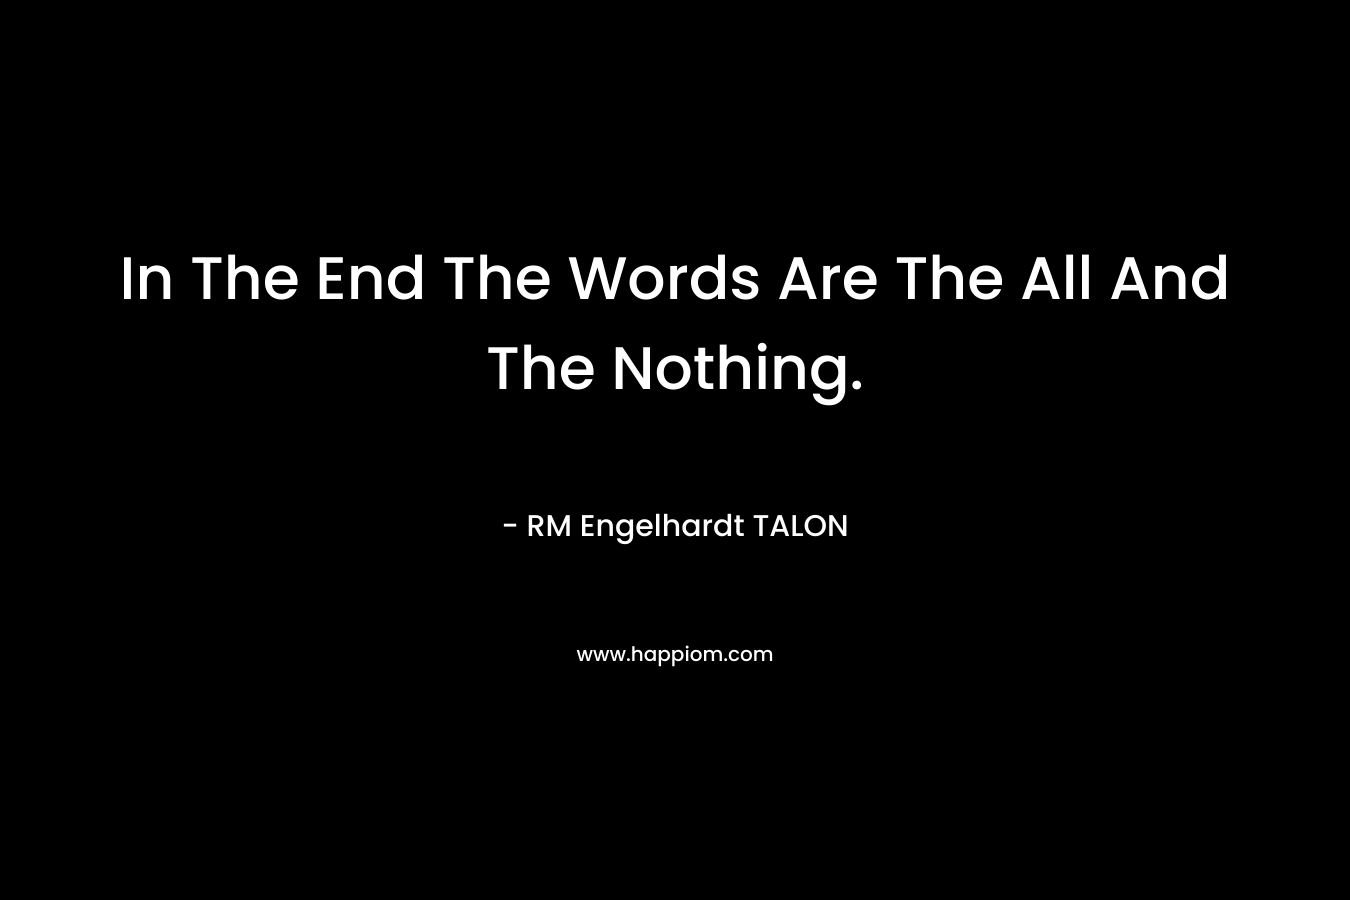 In The End The Words Are The All And The Nothing. – RM Engelhardt TALON